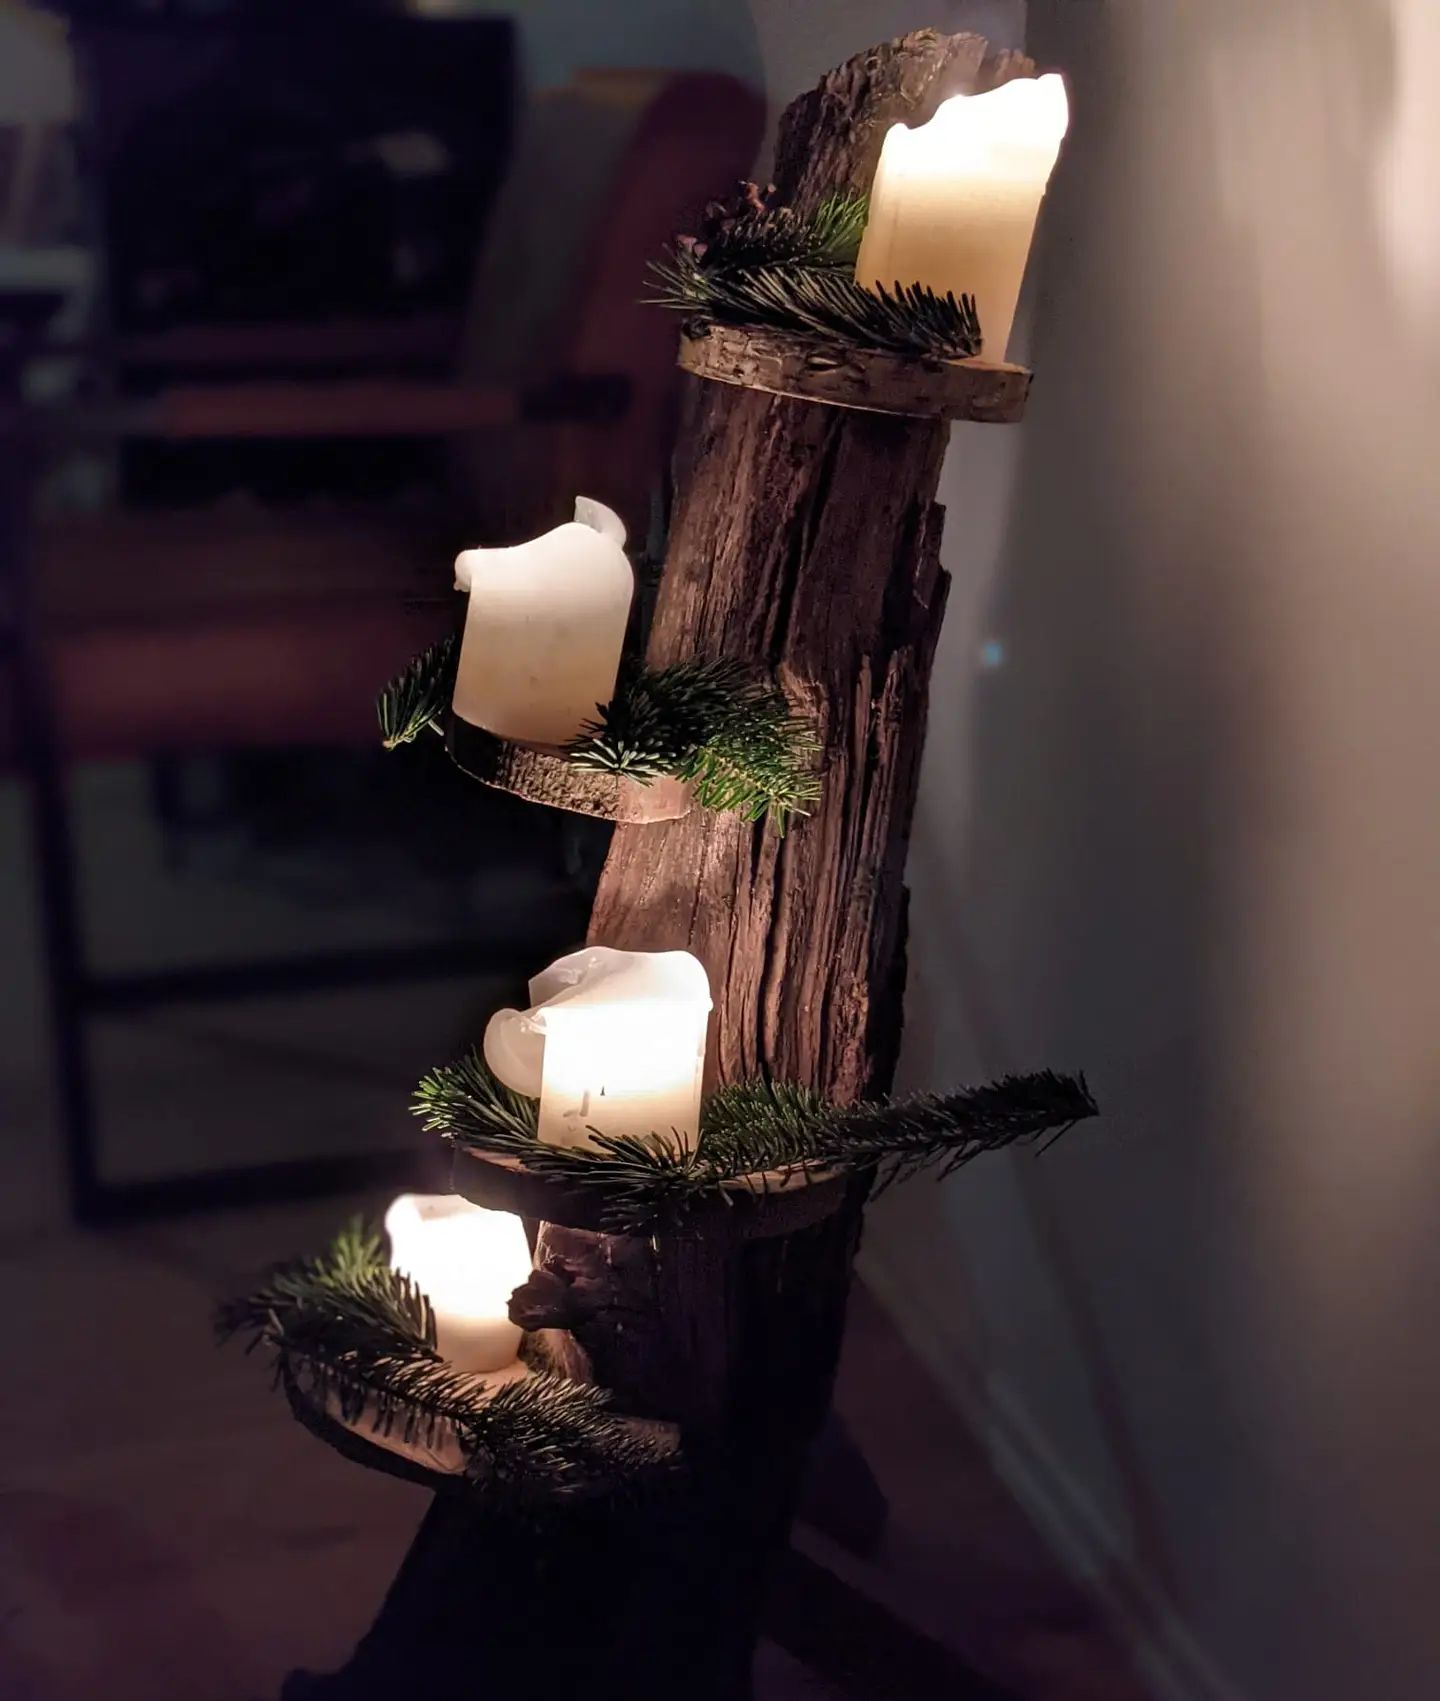 @nord_binchen asked for it, I built it. A nice piece of old wood used as an advent wreath. #diy #selfmade #advent #christmasdecor